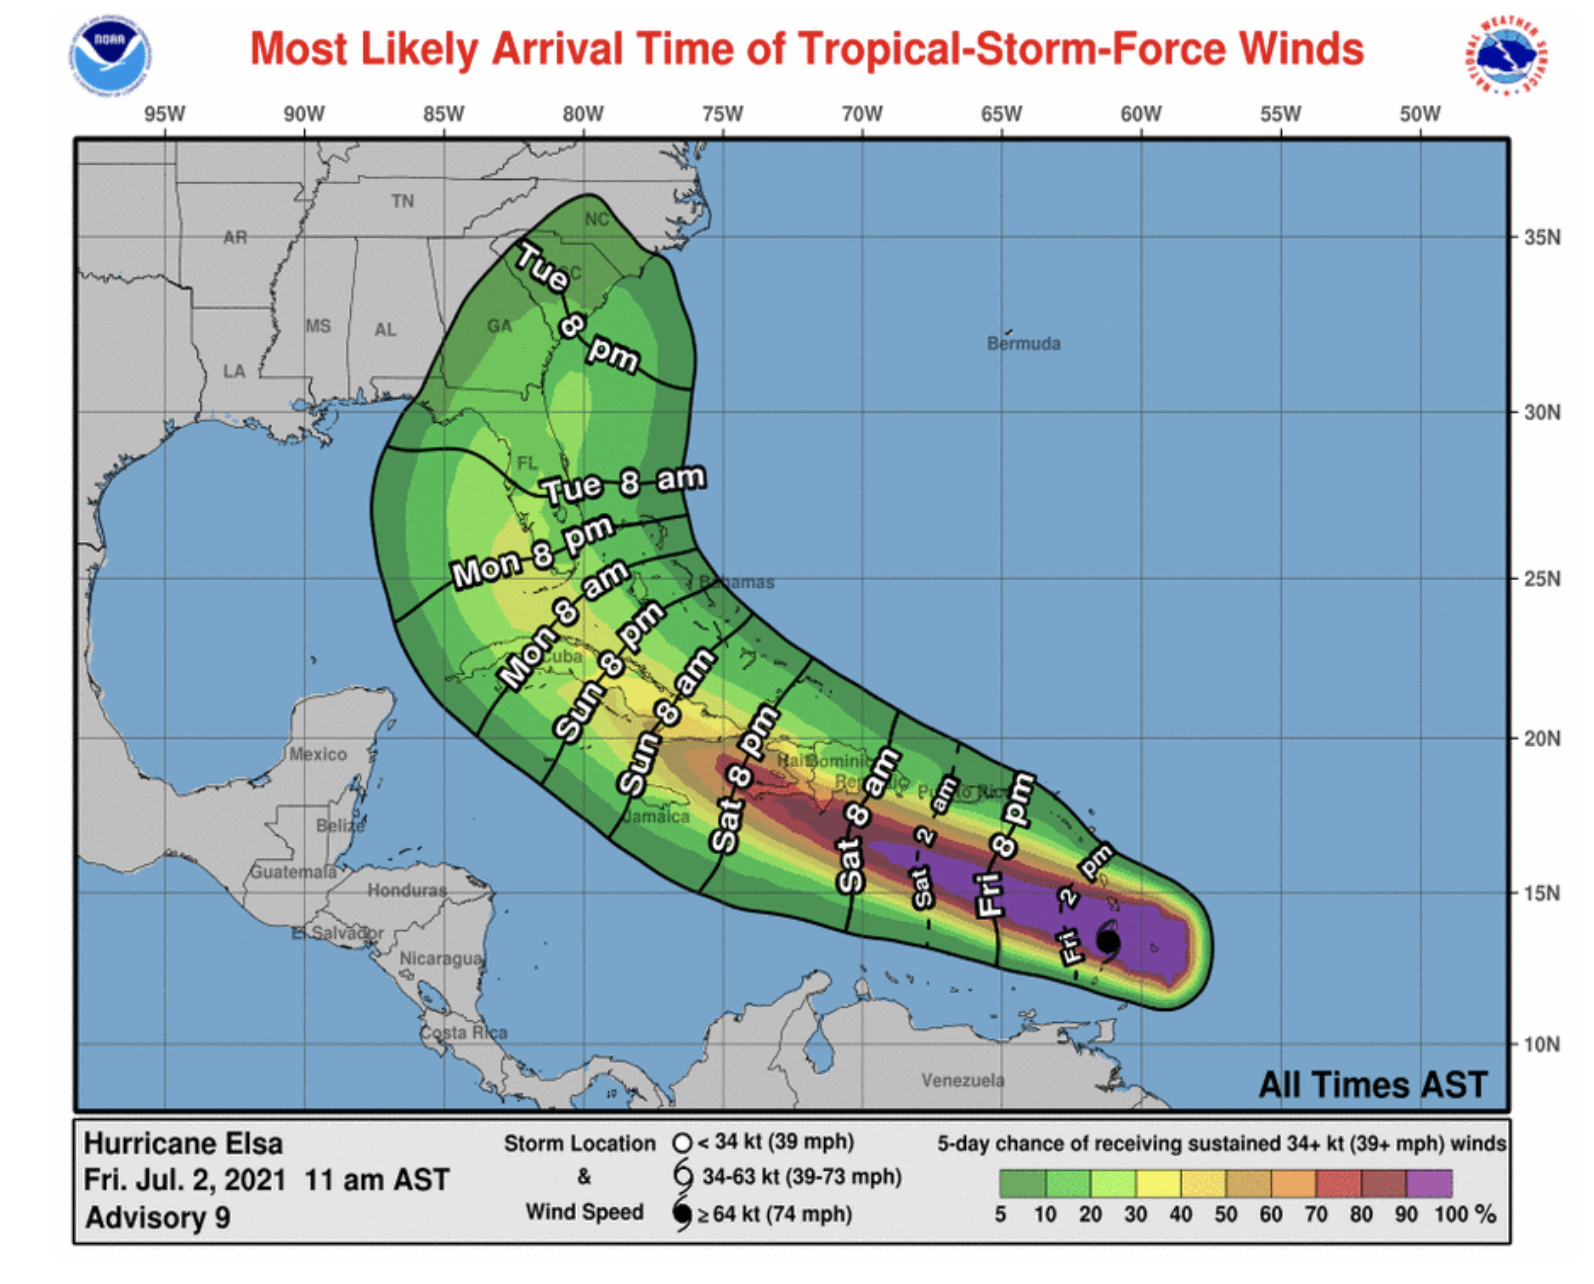 FIRST NAMED HURRICANE FORMED No forecasted impacted to The Bahamas